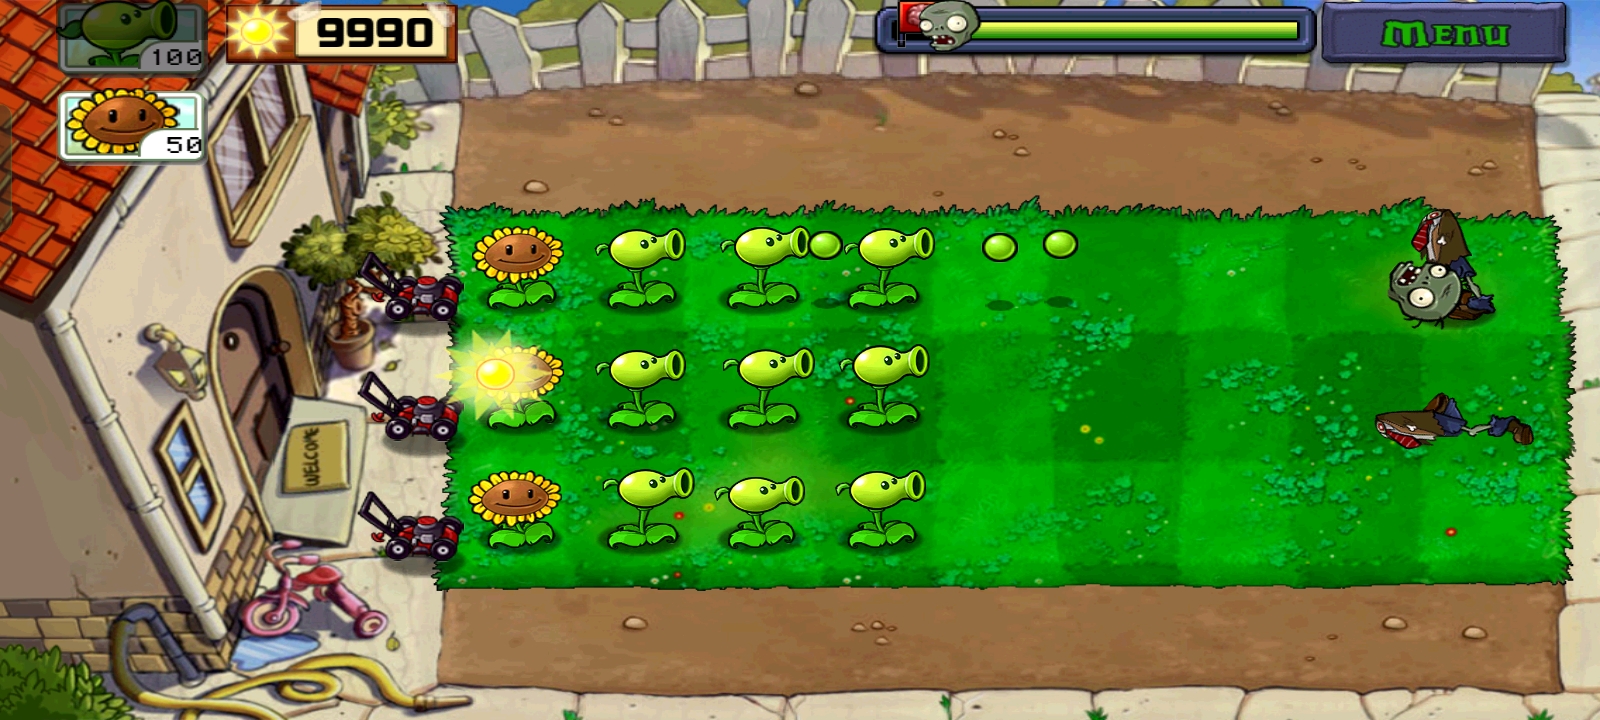 Download Plants vs. Zombies 2 MOD APK v11.0.1 for Android